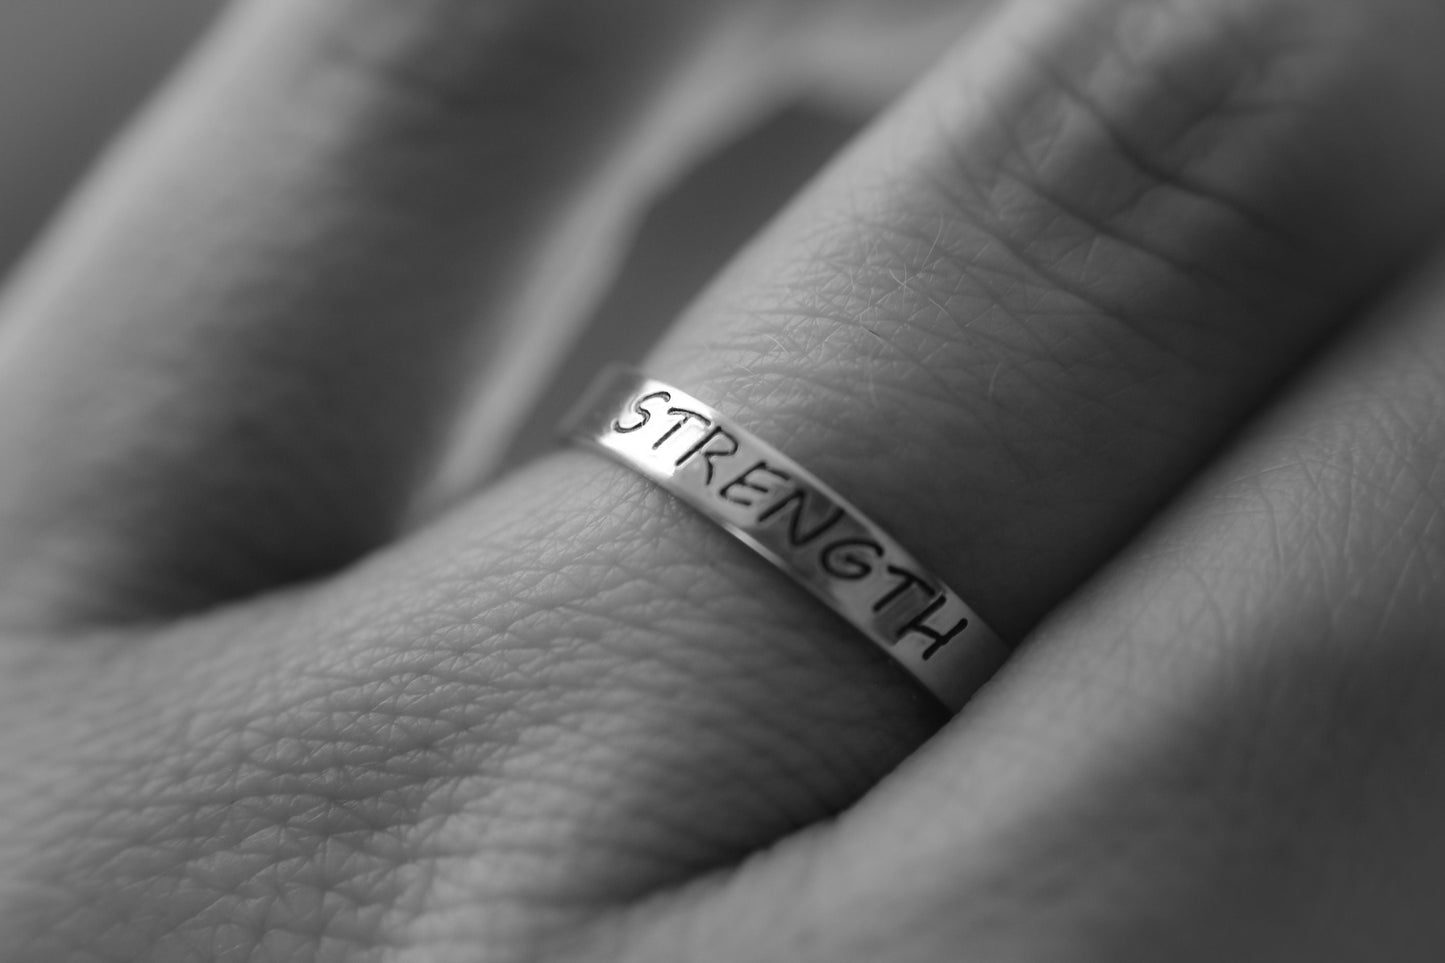 Inspirational Ring, Customizable Inspirational Ring, Strength Ring, Custom Band Ring, Name Ring, Personalized Ring, Inspirational Jewelry